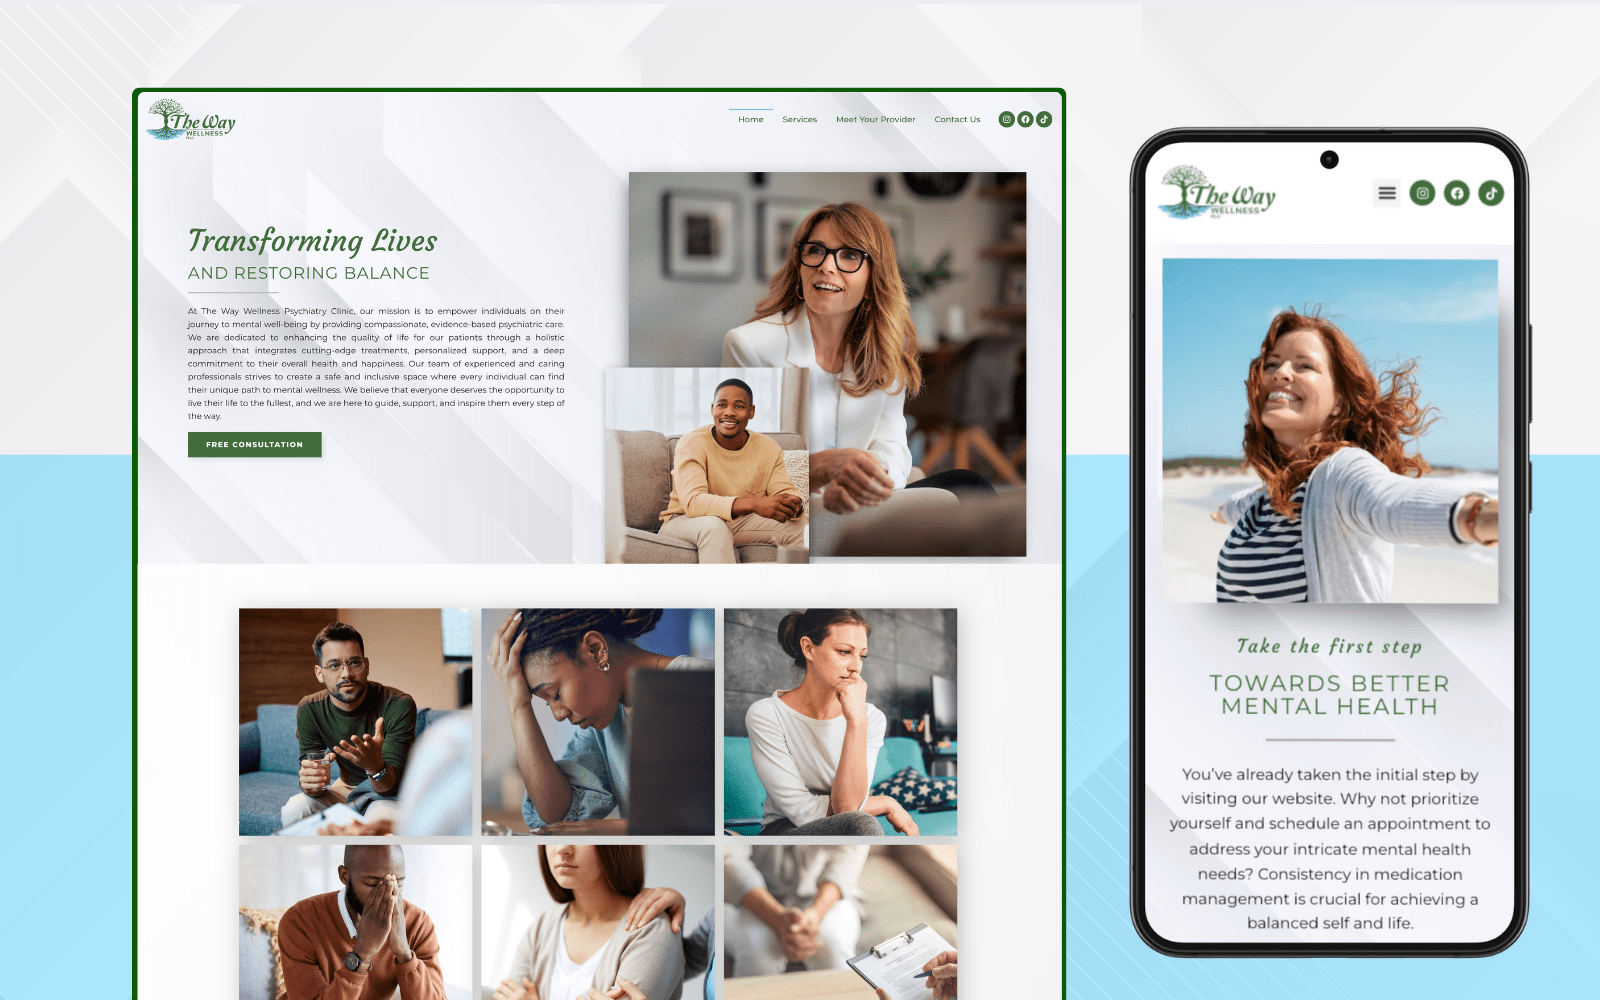 Website design for mental health clinic featuring calming colors, easy navigation, and resources for support.